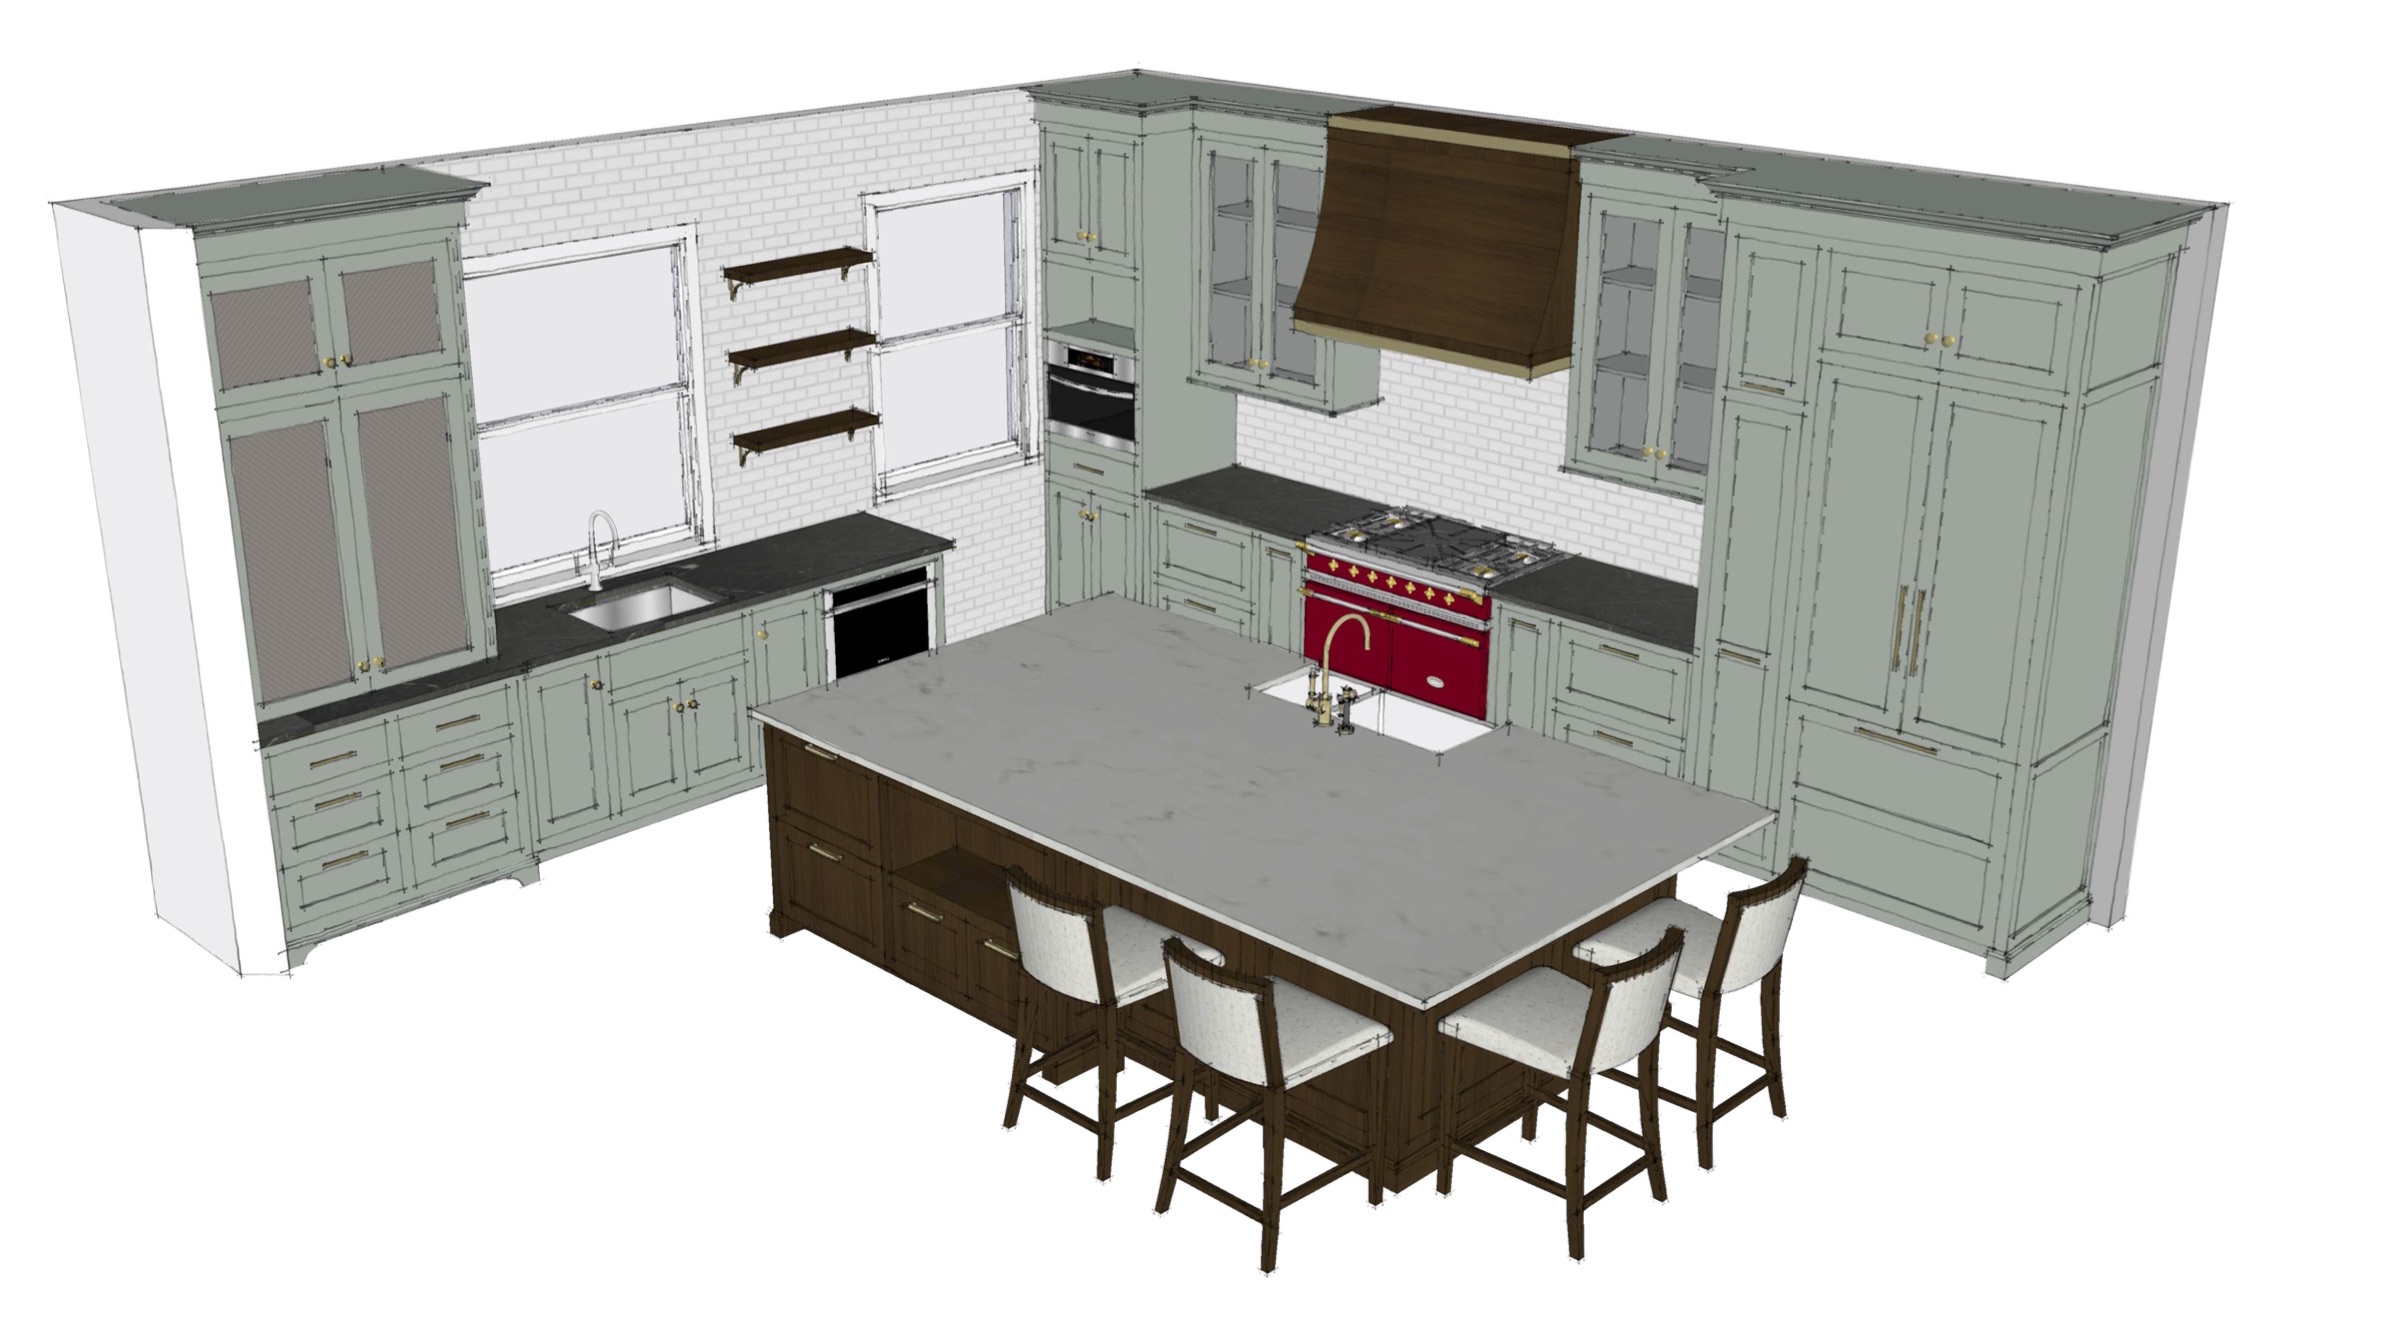 Project 1896: Kitchen Plans! | Kelly Rogers Interiors | Interiors for Families